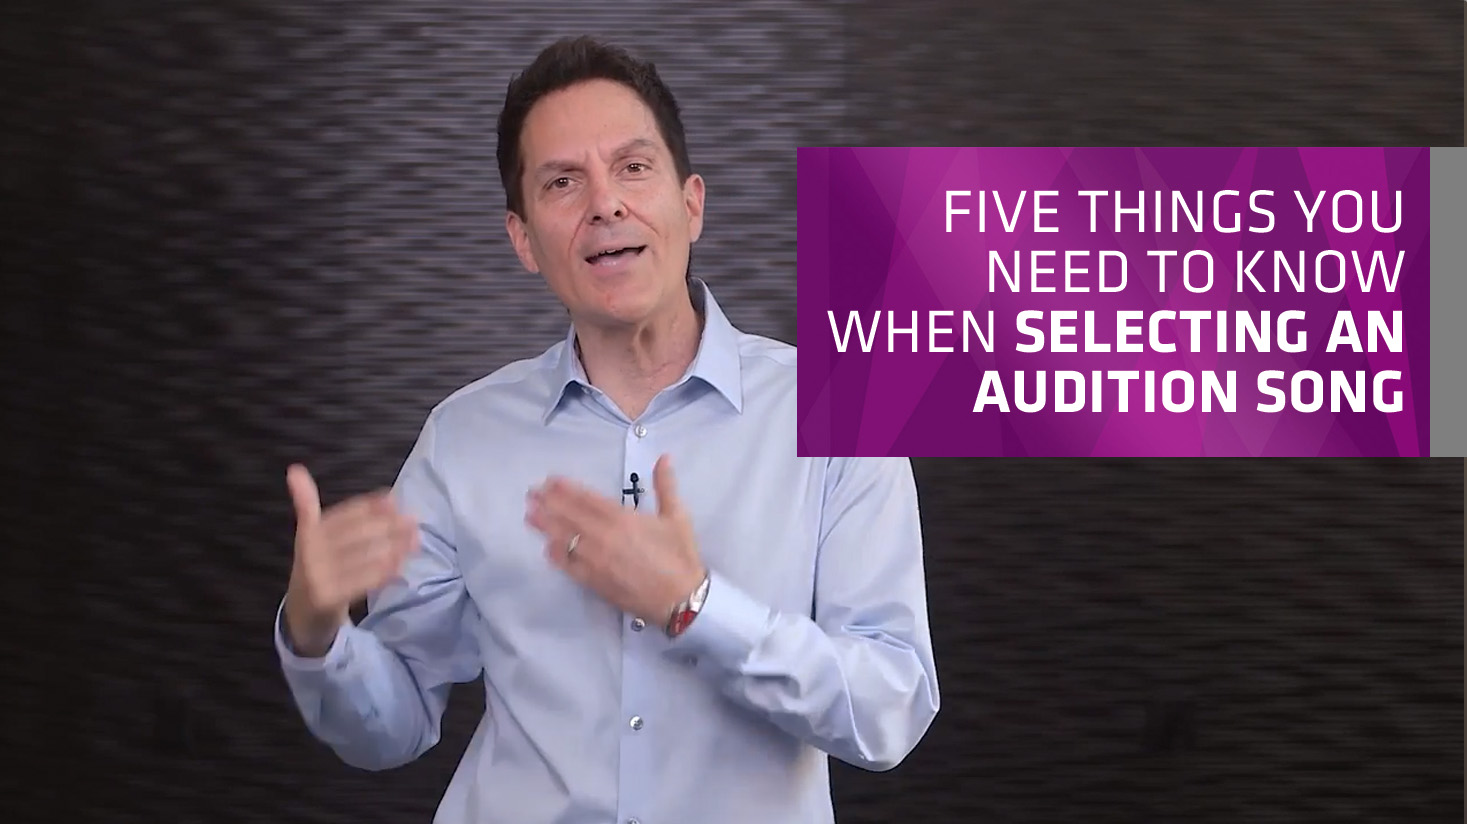 Five Things You Need to Know When Choosing an Audition Song